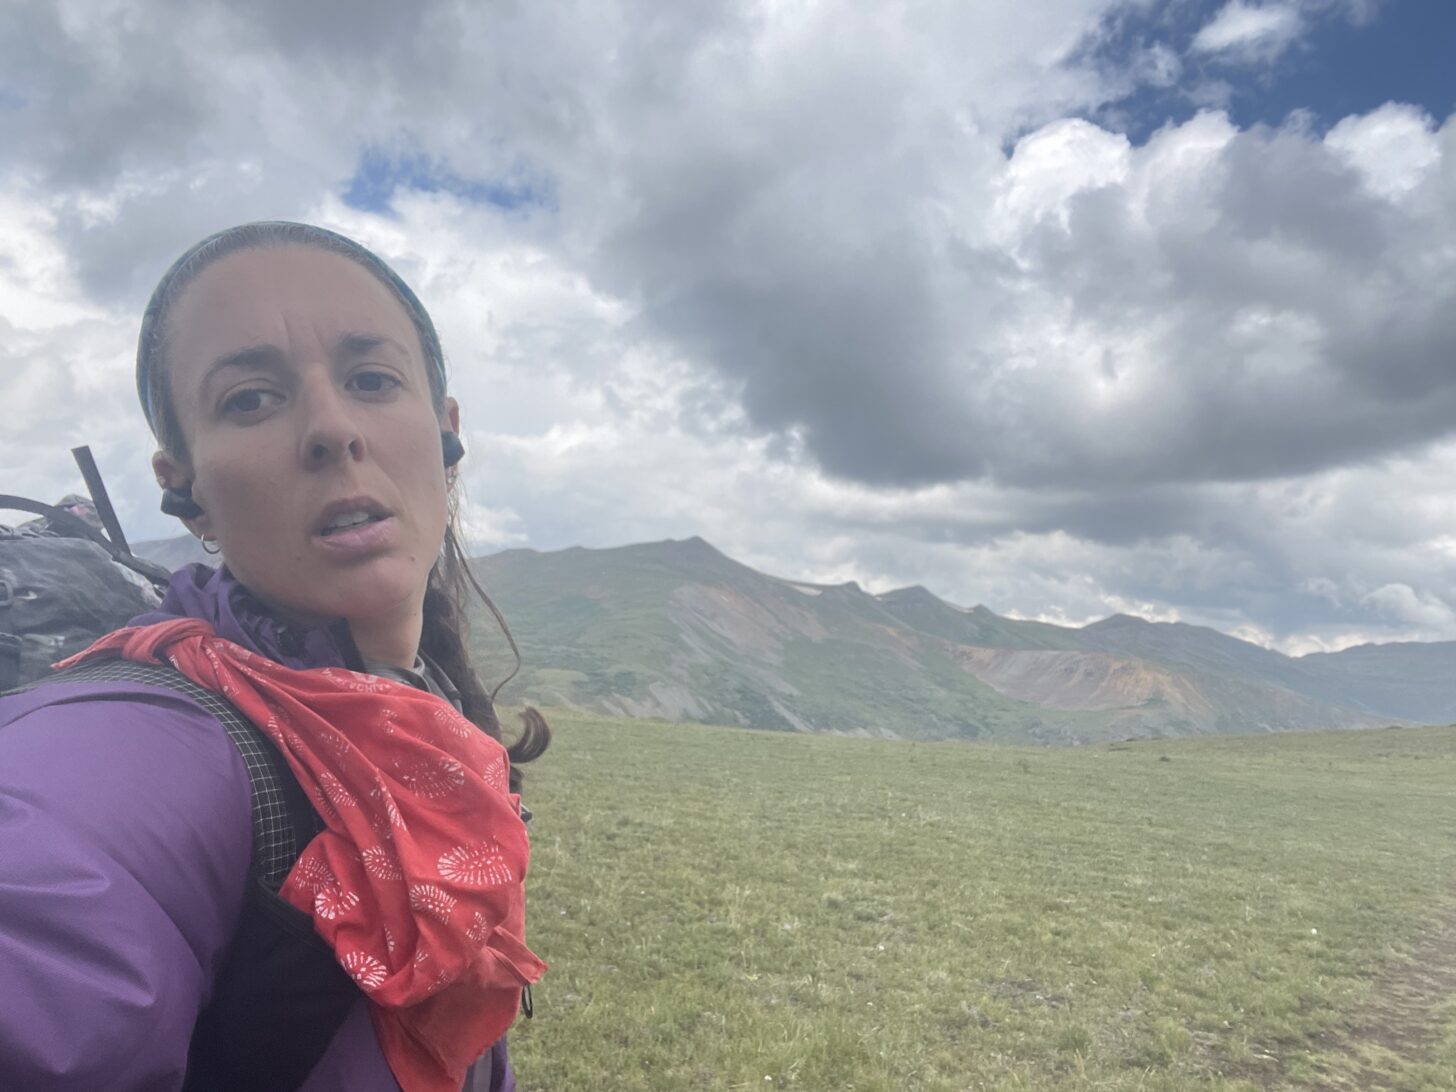 a woman makes a face at the camera while taking a selfie. Mountains in the background.